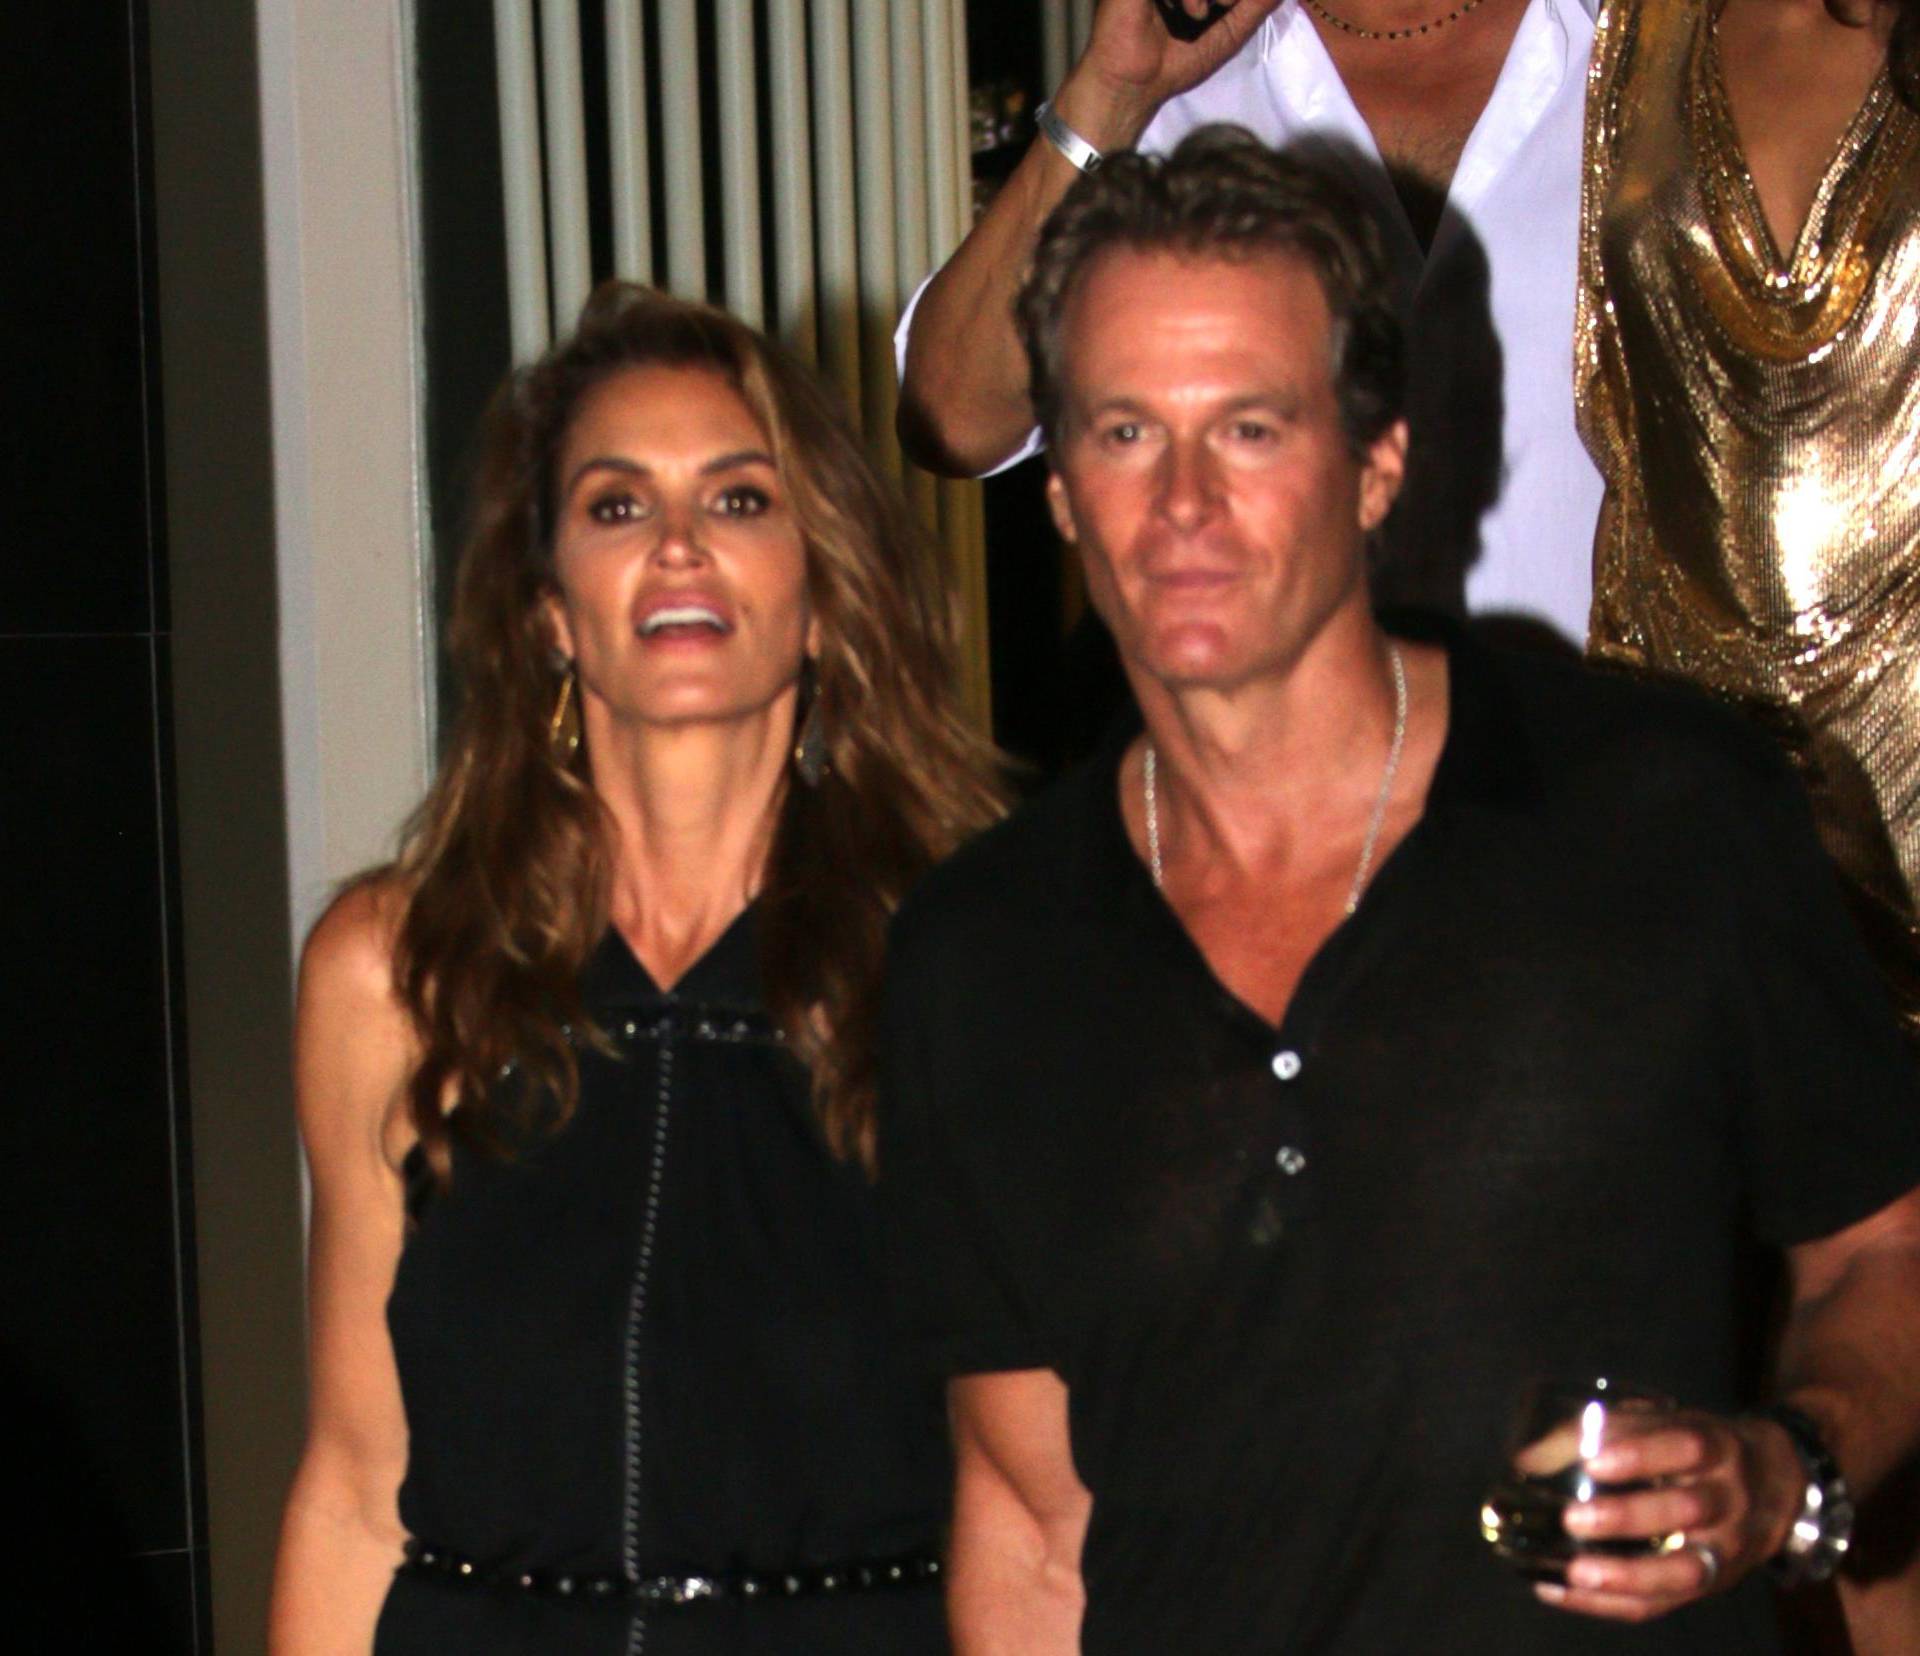 George and Amal Clooney whith Cindy Crawford and Husband in  CasamigosTequila in Ibiza